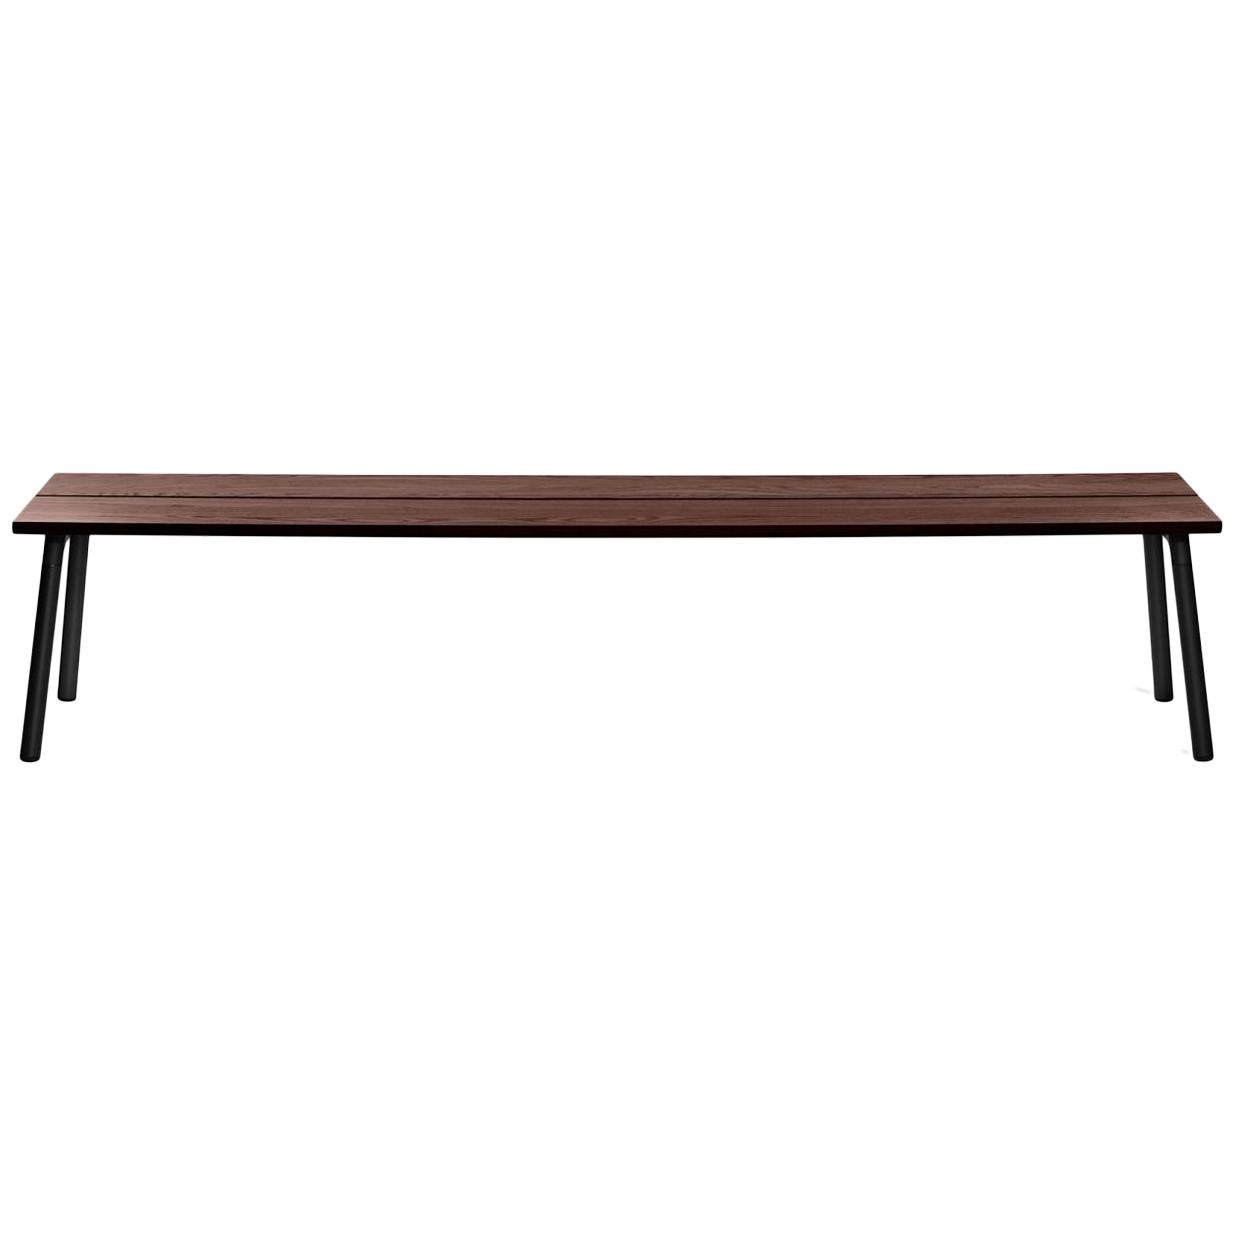 Emeco Run 4-Seat Bench in Black Powder-Coat and Walnut by Sam Hecht & Kim Colin For Sale